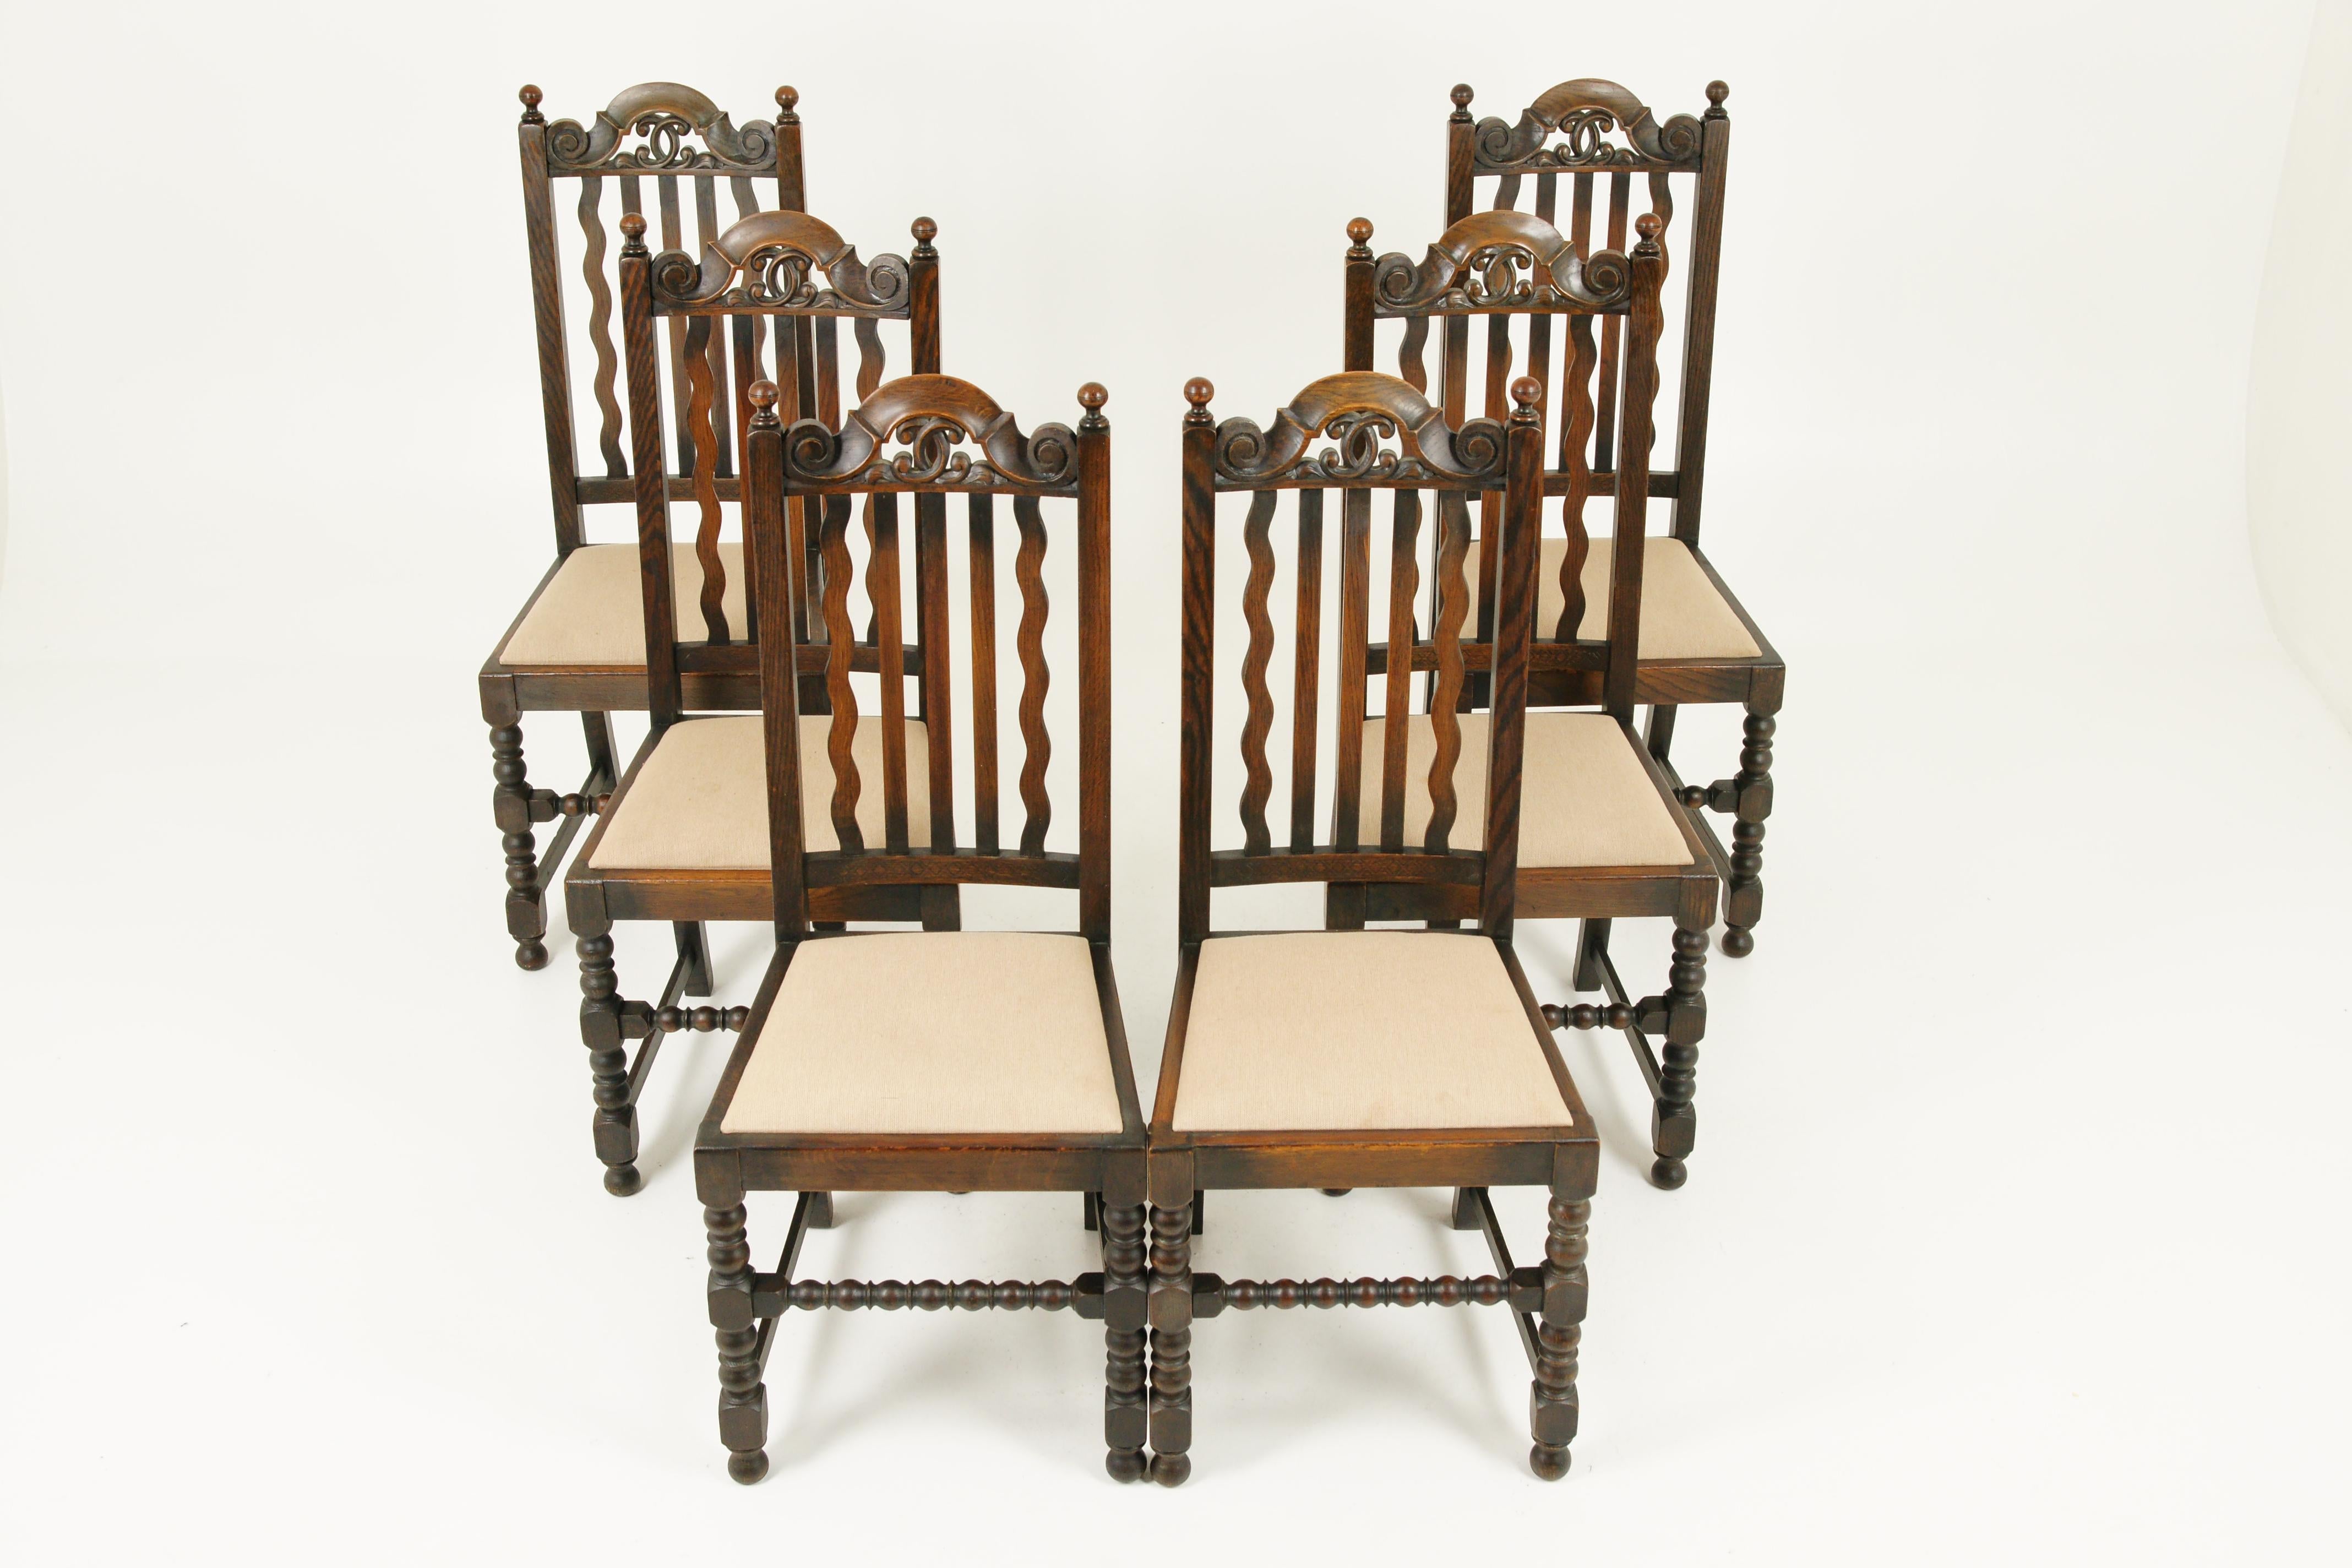 Antique dining chairs, 6 oak dining chairs, Scotland 1920, Antique Furniture, B1726

Scotland, 1920
solid oak with original finish
high back with open carved top
finials to tops of supports
three straight slats and two wavy slats on the